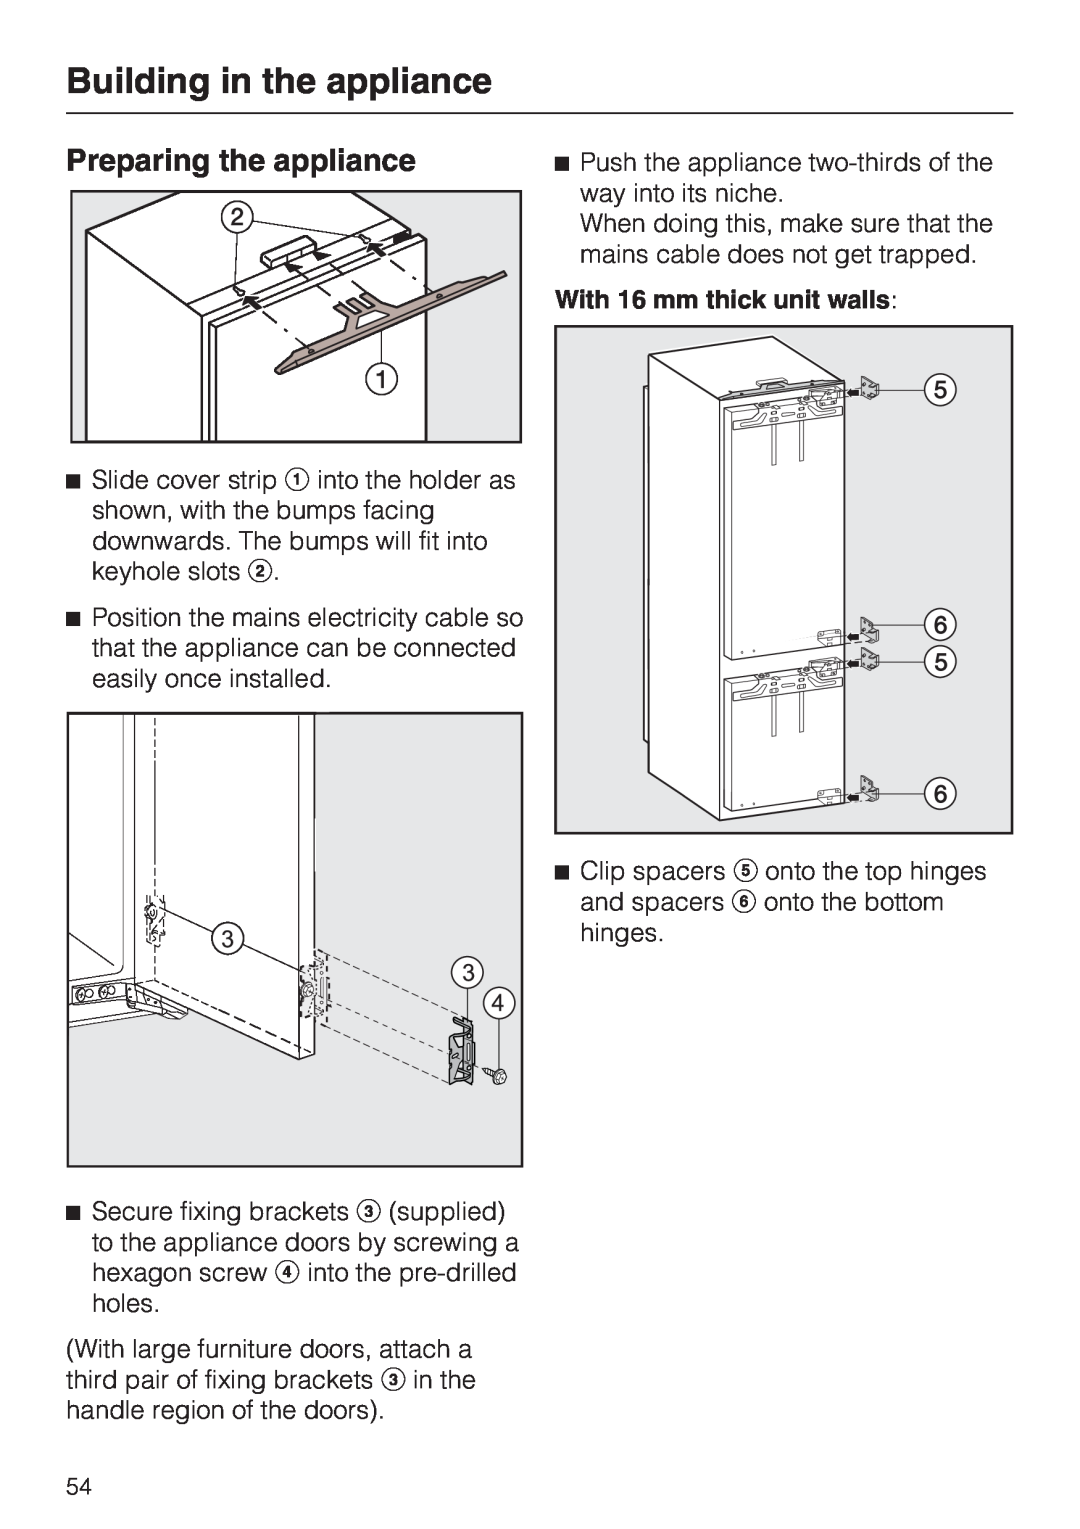 Miele KF 9757 ID installation instructions Preparing the appliance, Building in the appliance, With 16 mm thick unit walls 